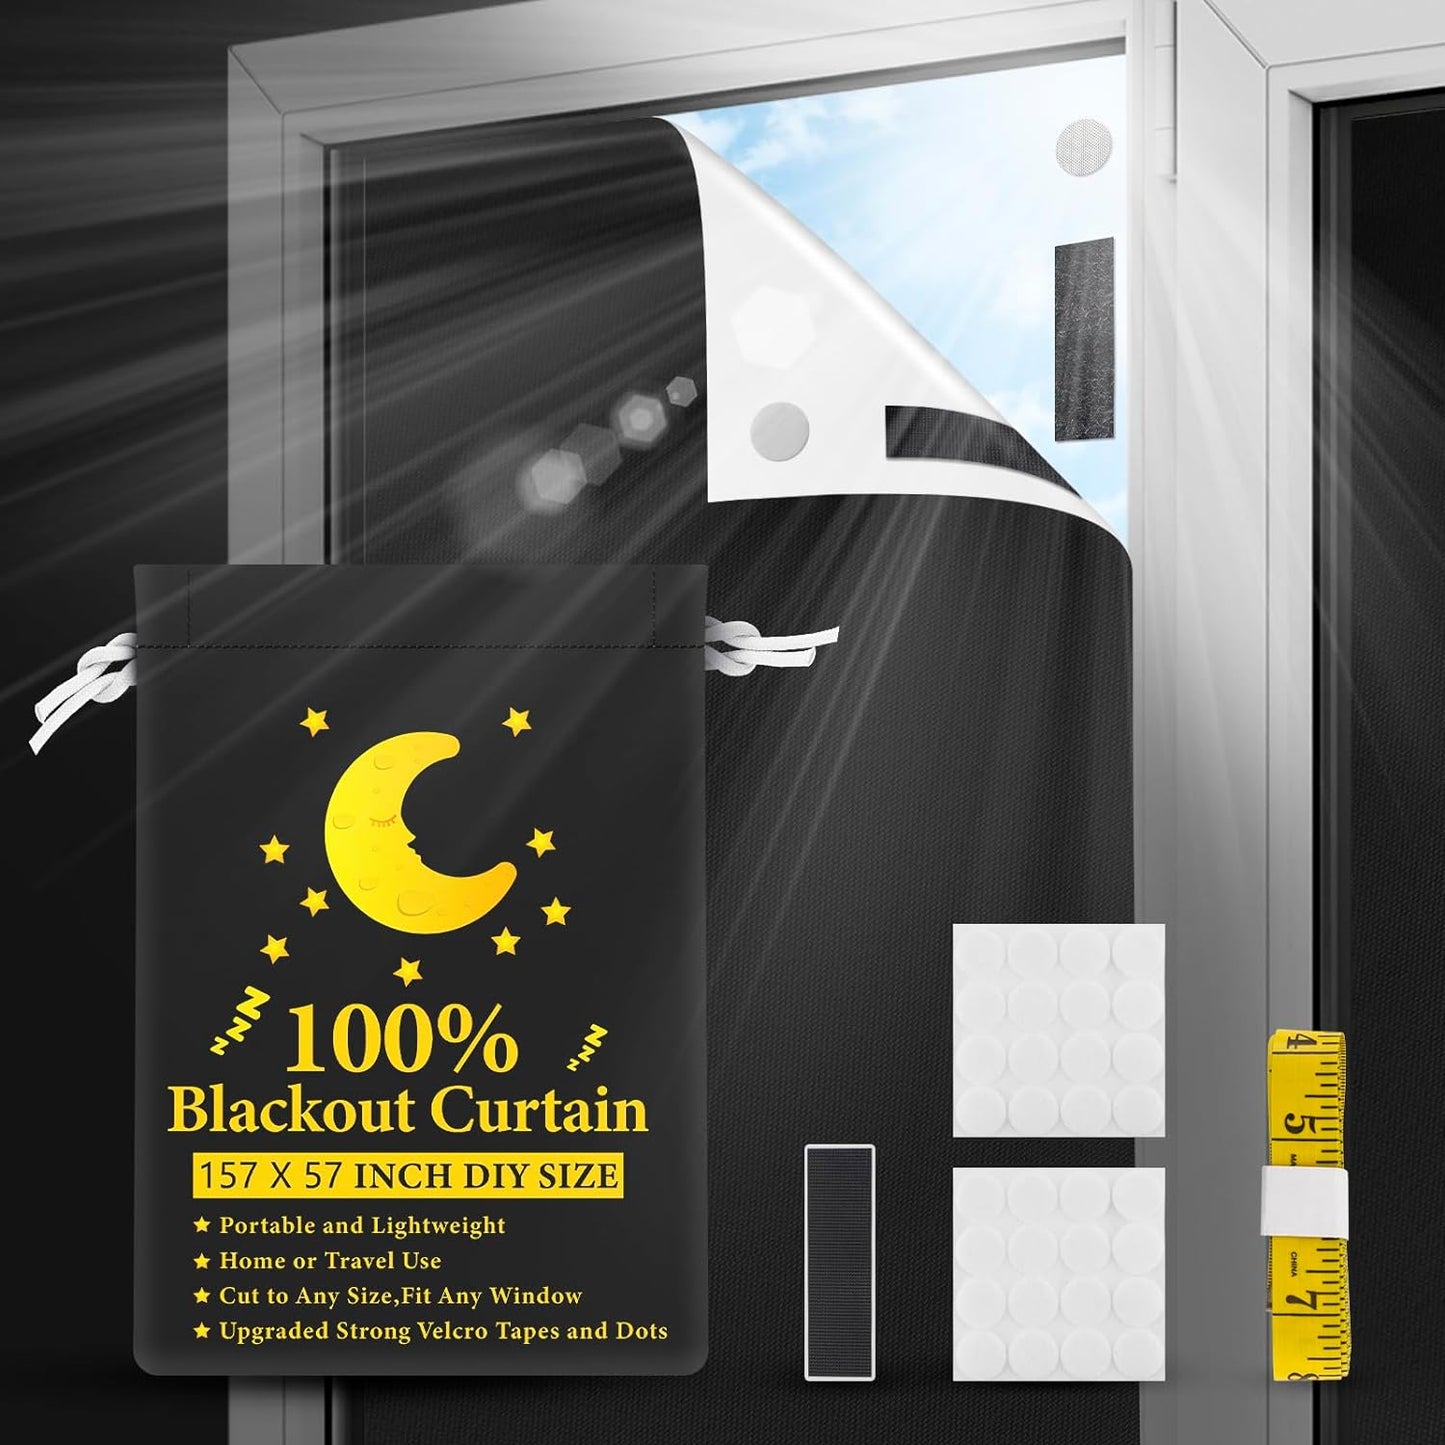 Portable Blackout Curtains, 57"X 39" Blackout Shades for Windows 100% Black Out Temporary Blackout Blinds for Bedroom Baby Nursery Window Travel Dorm Room  YOOMINI 157" X 57"  